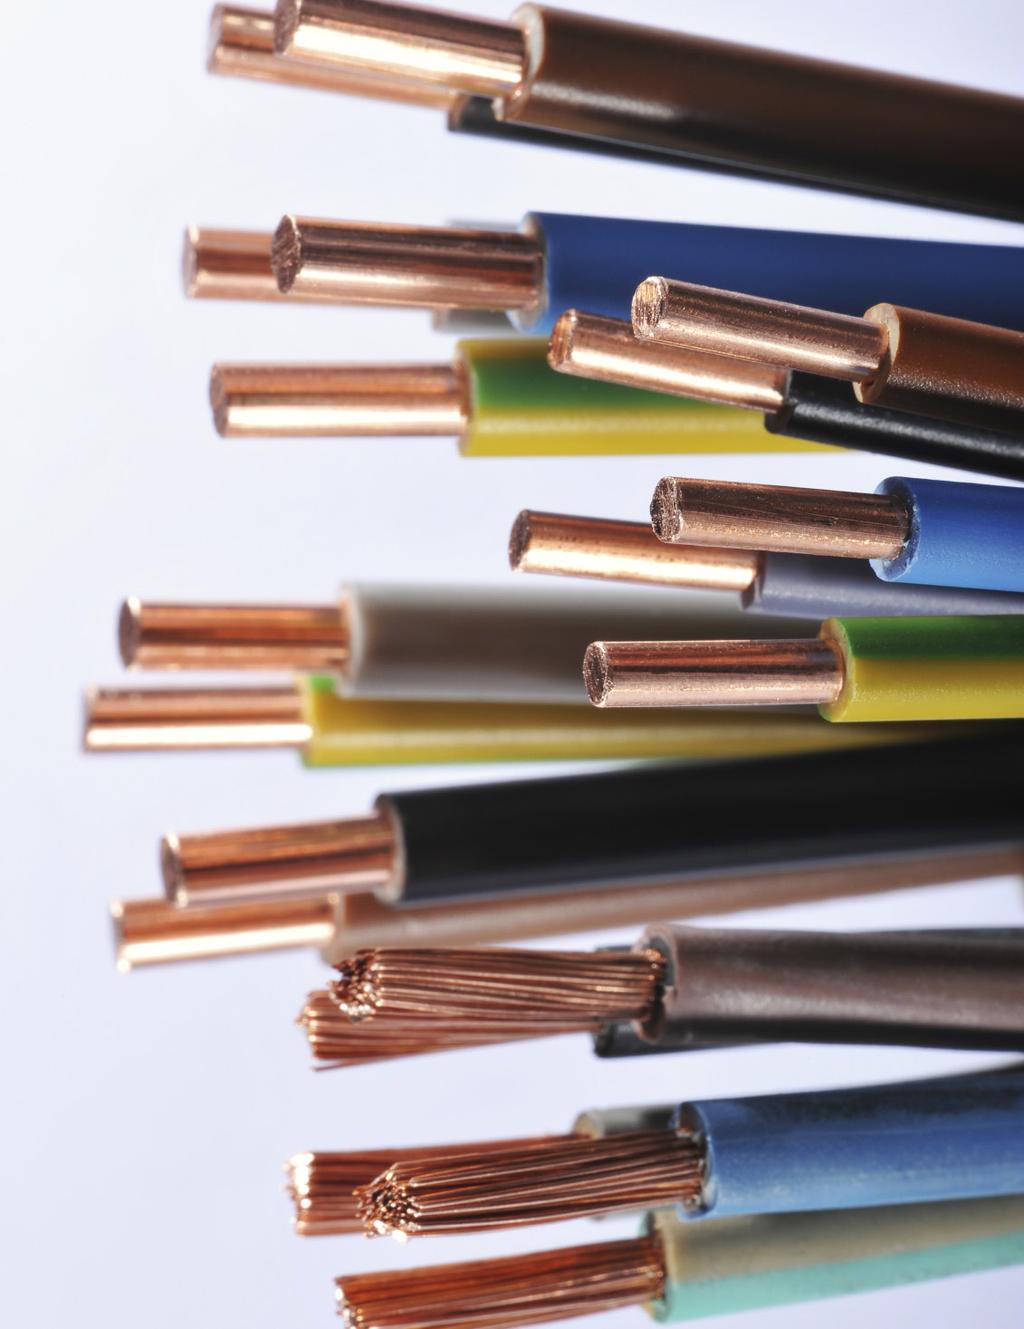 A good cable supplier will have all the conductor options that a